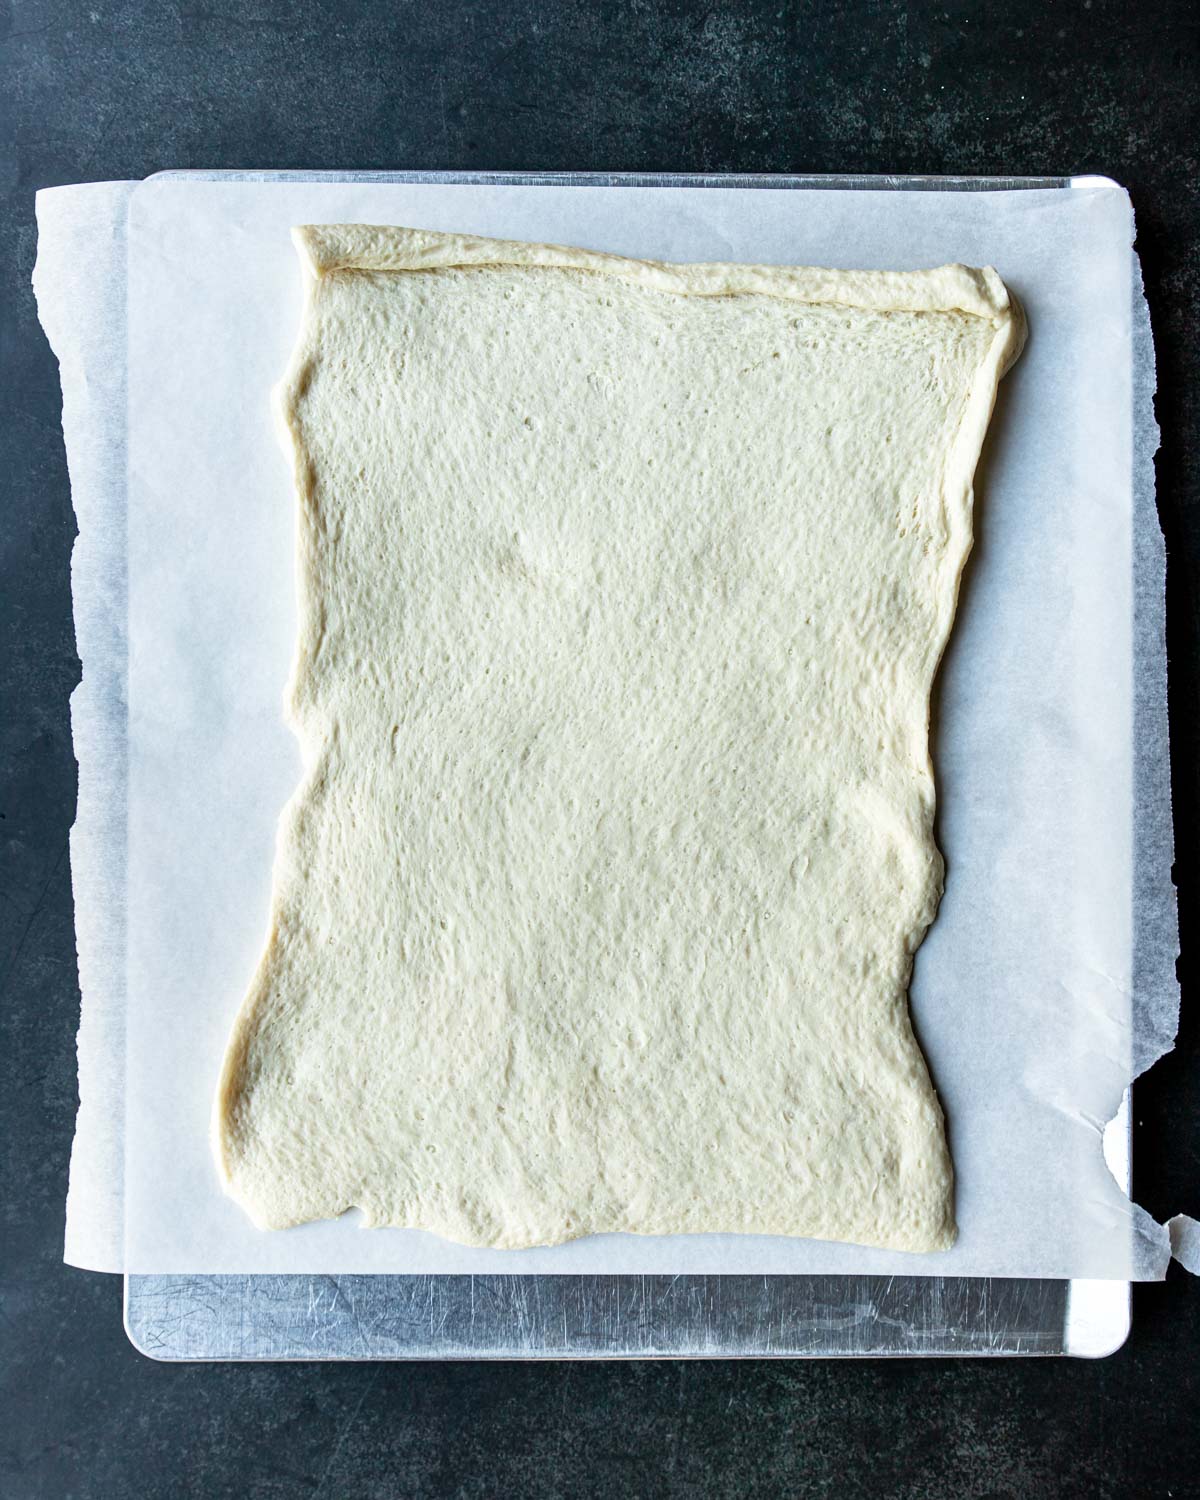 pizza crust unrolled on a parchment paper lined baking sheet